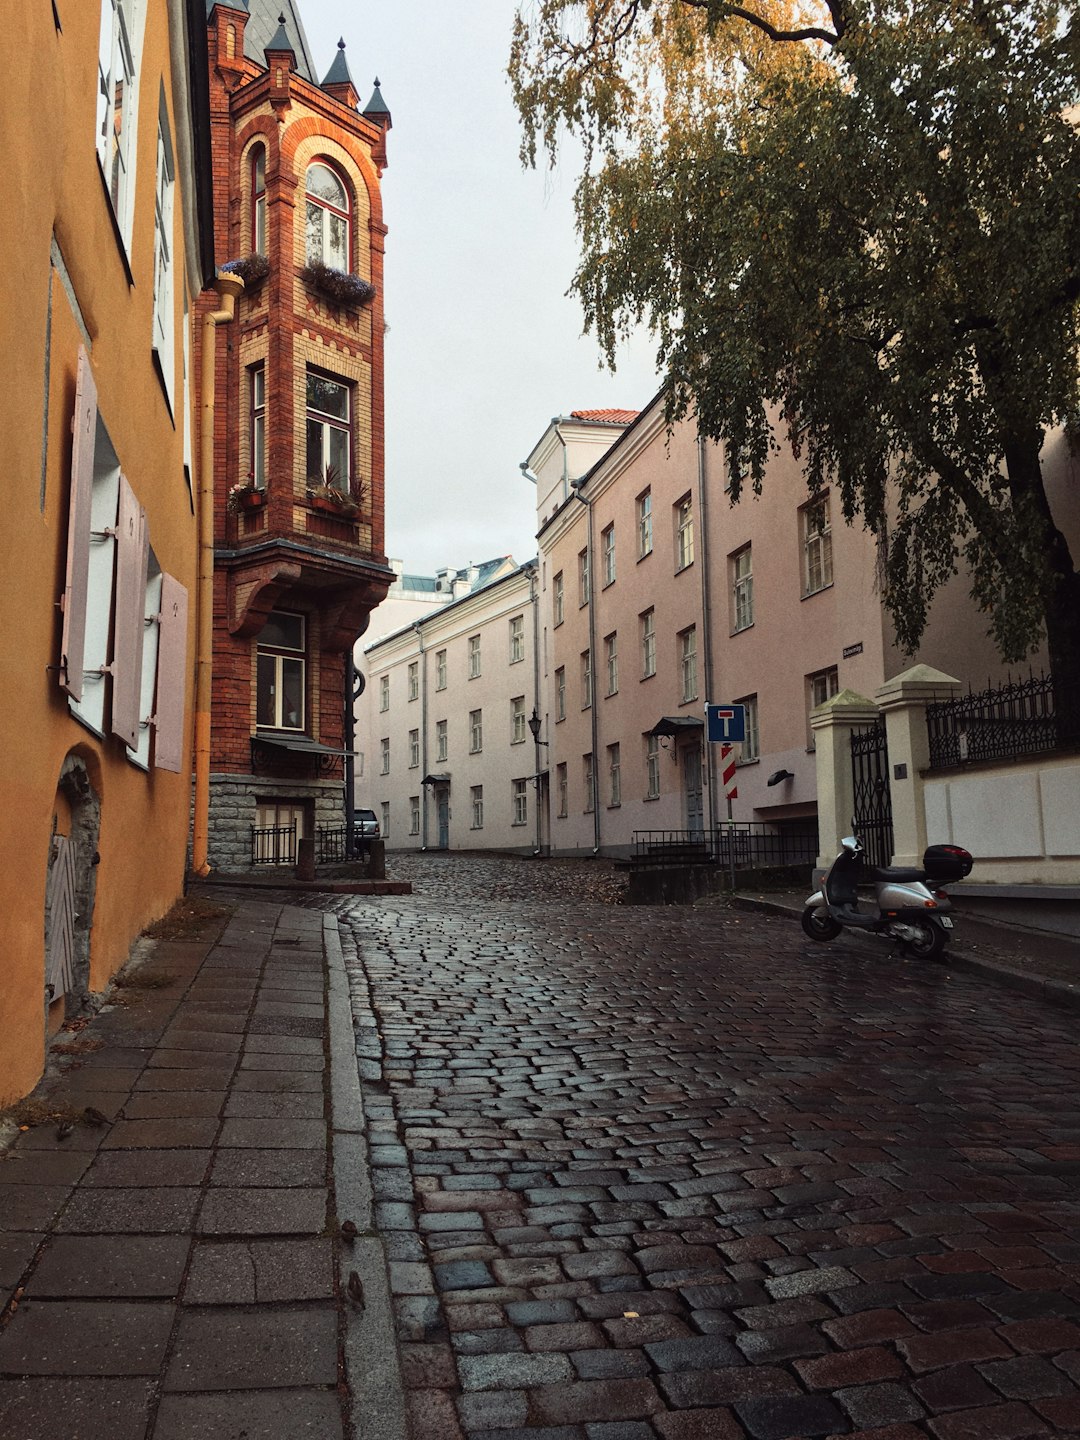 Travel Tips and Stories of Old Town of Tallinn in Estonia